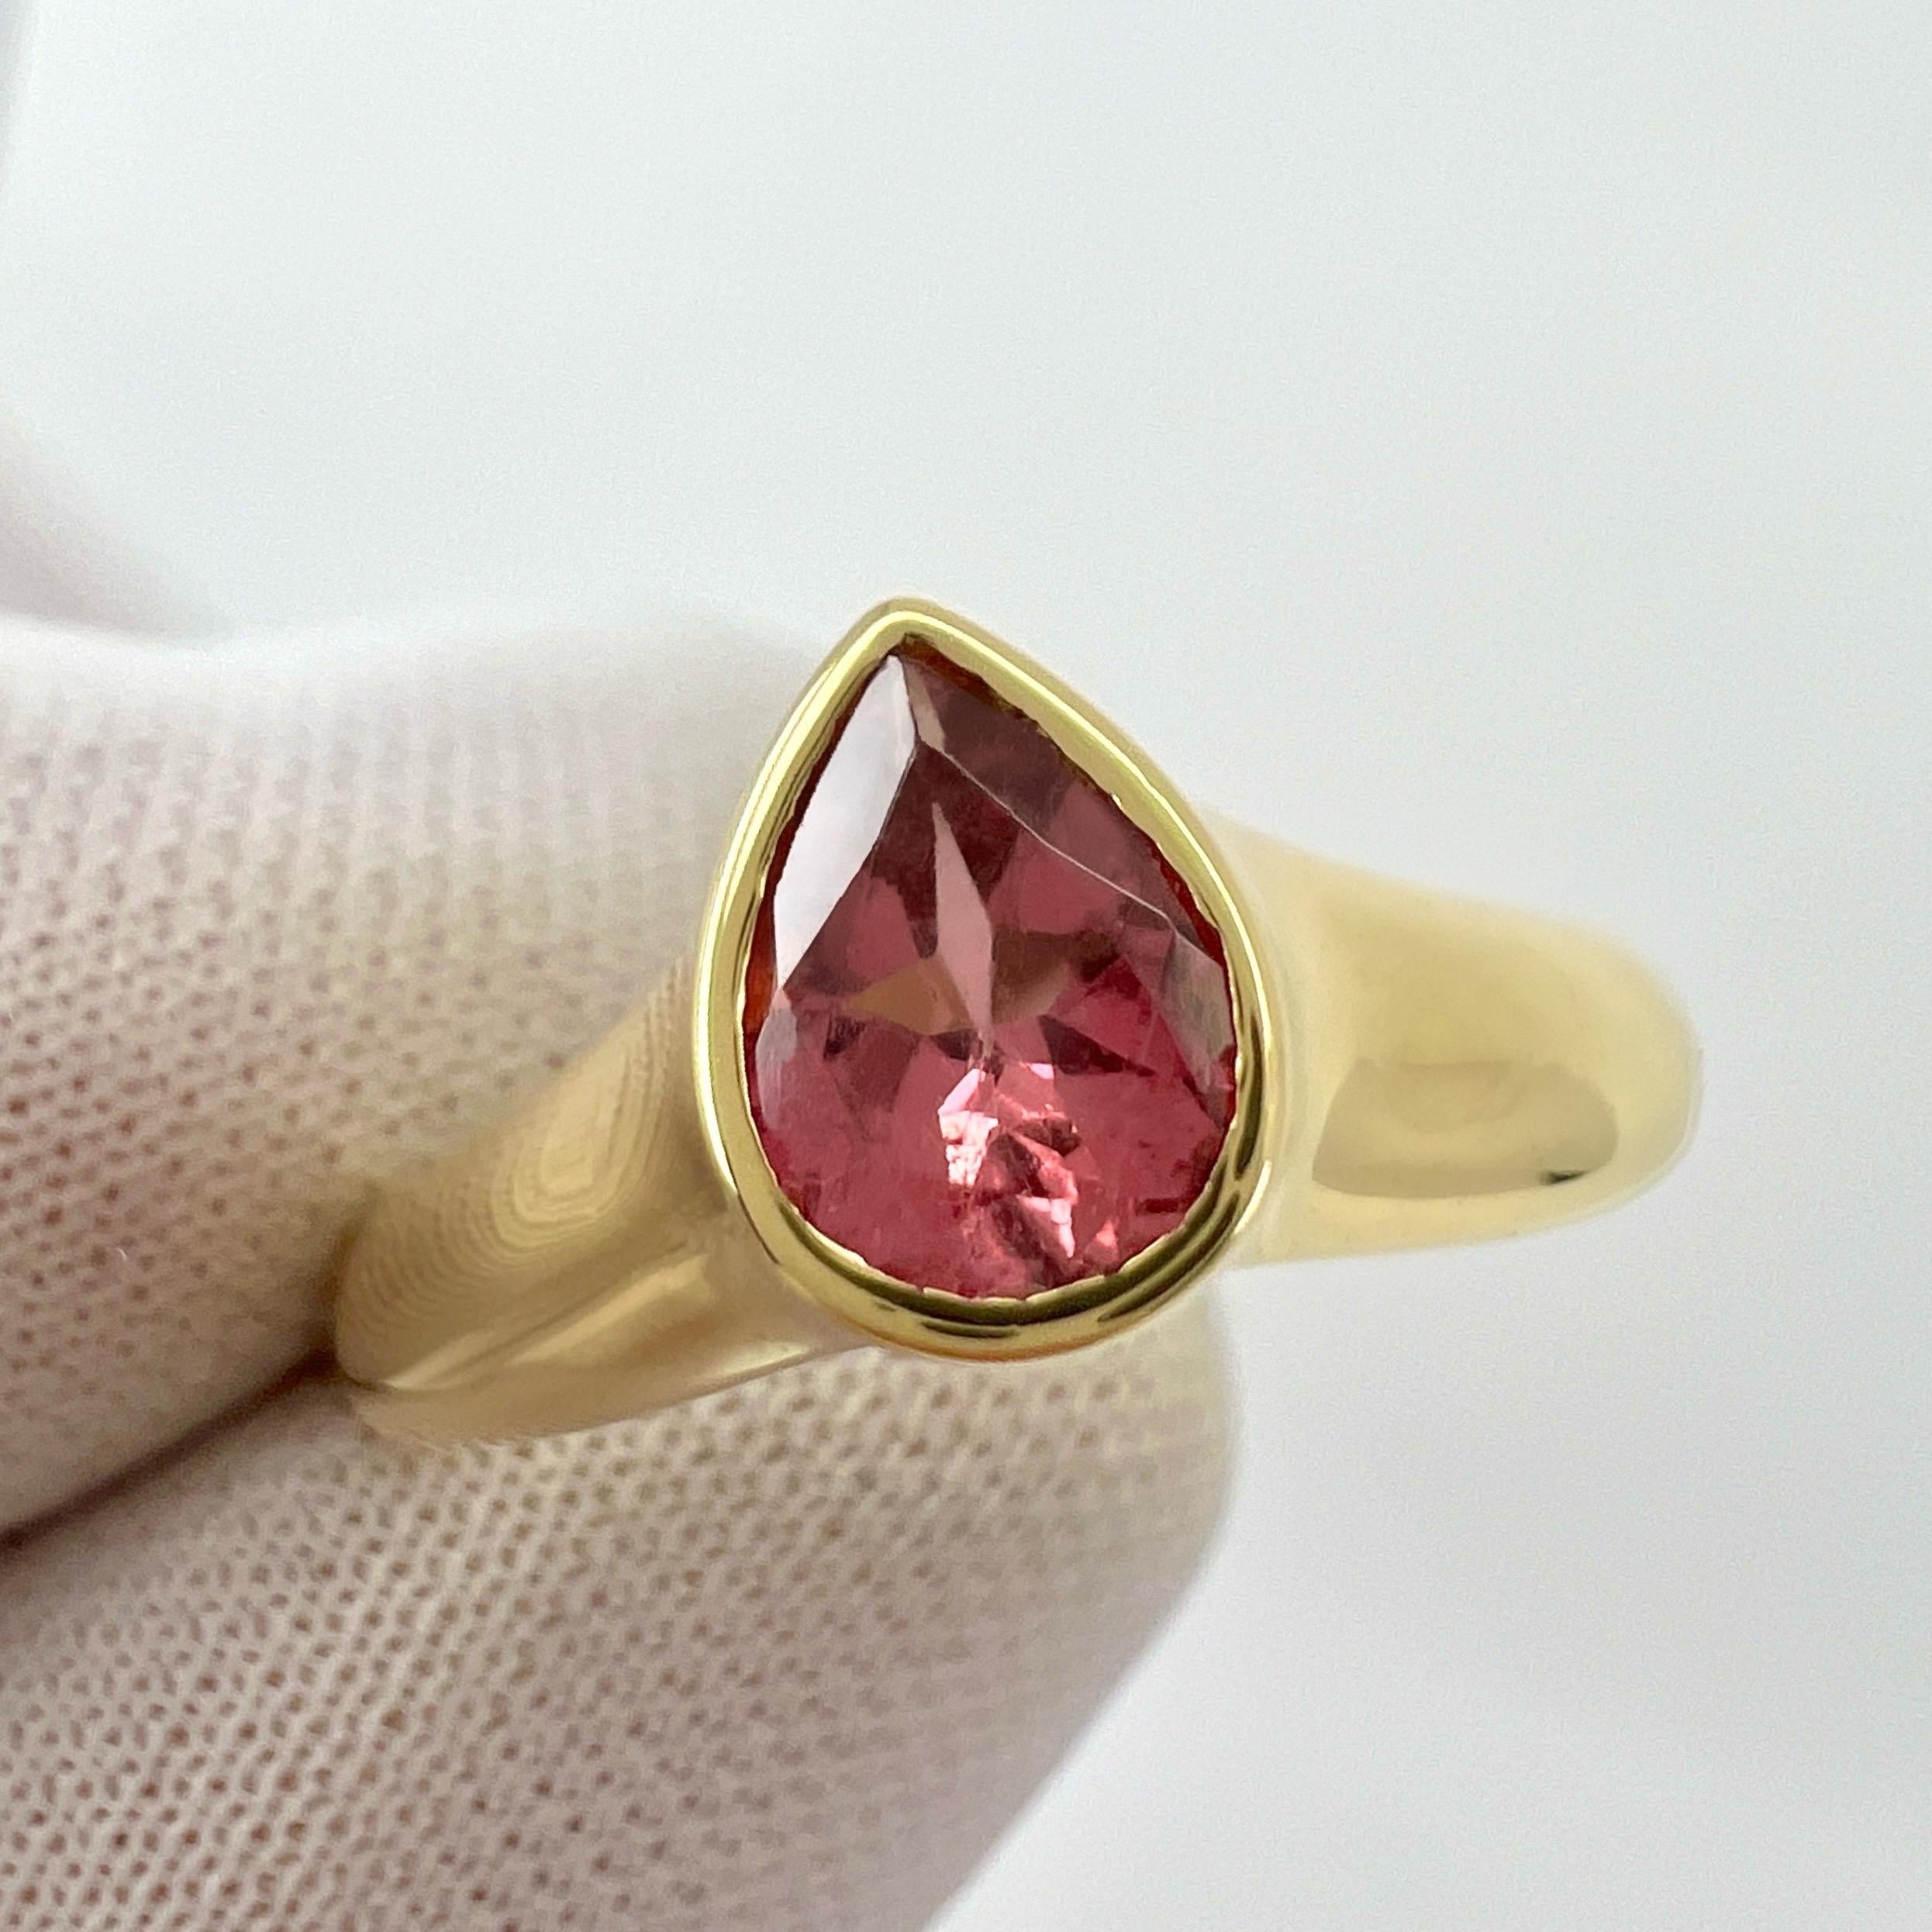 Rare Vintage Van Cleef & Arpels Pink Tourmaline Pear Cut 18k Yellow Gold Ring For Sale 4